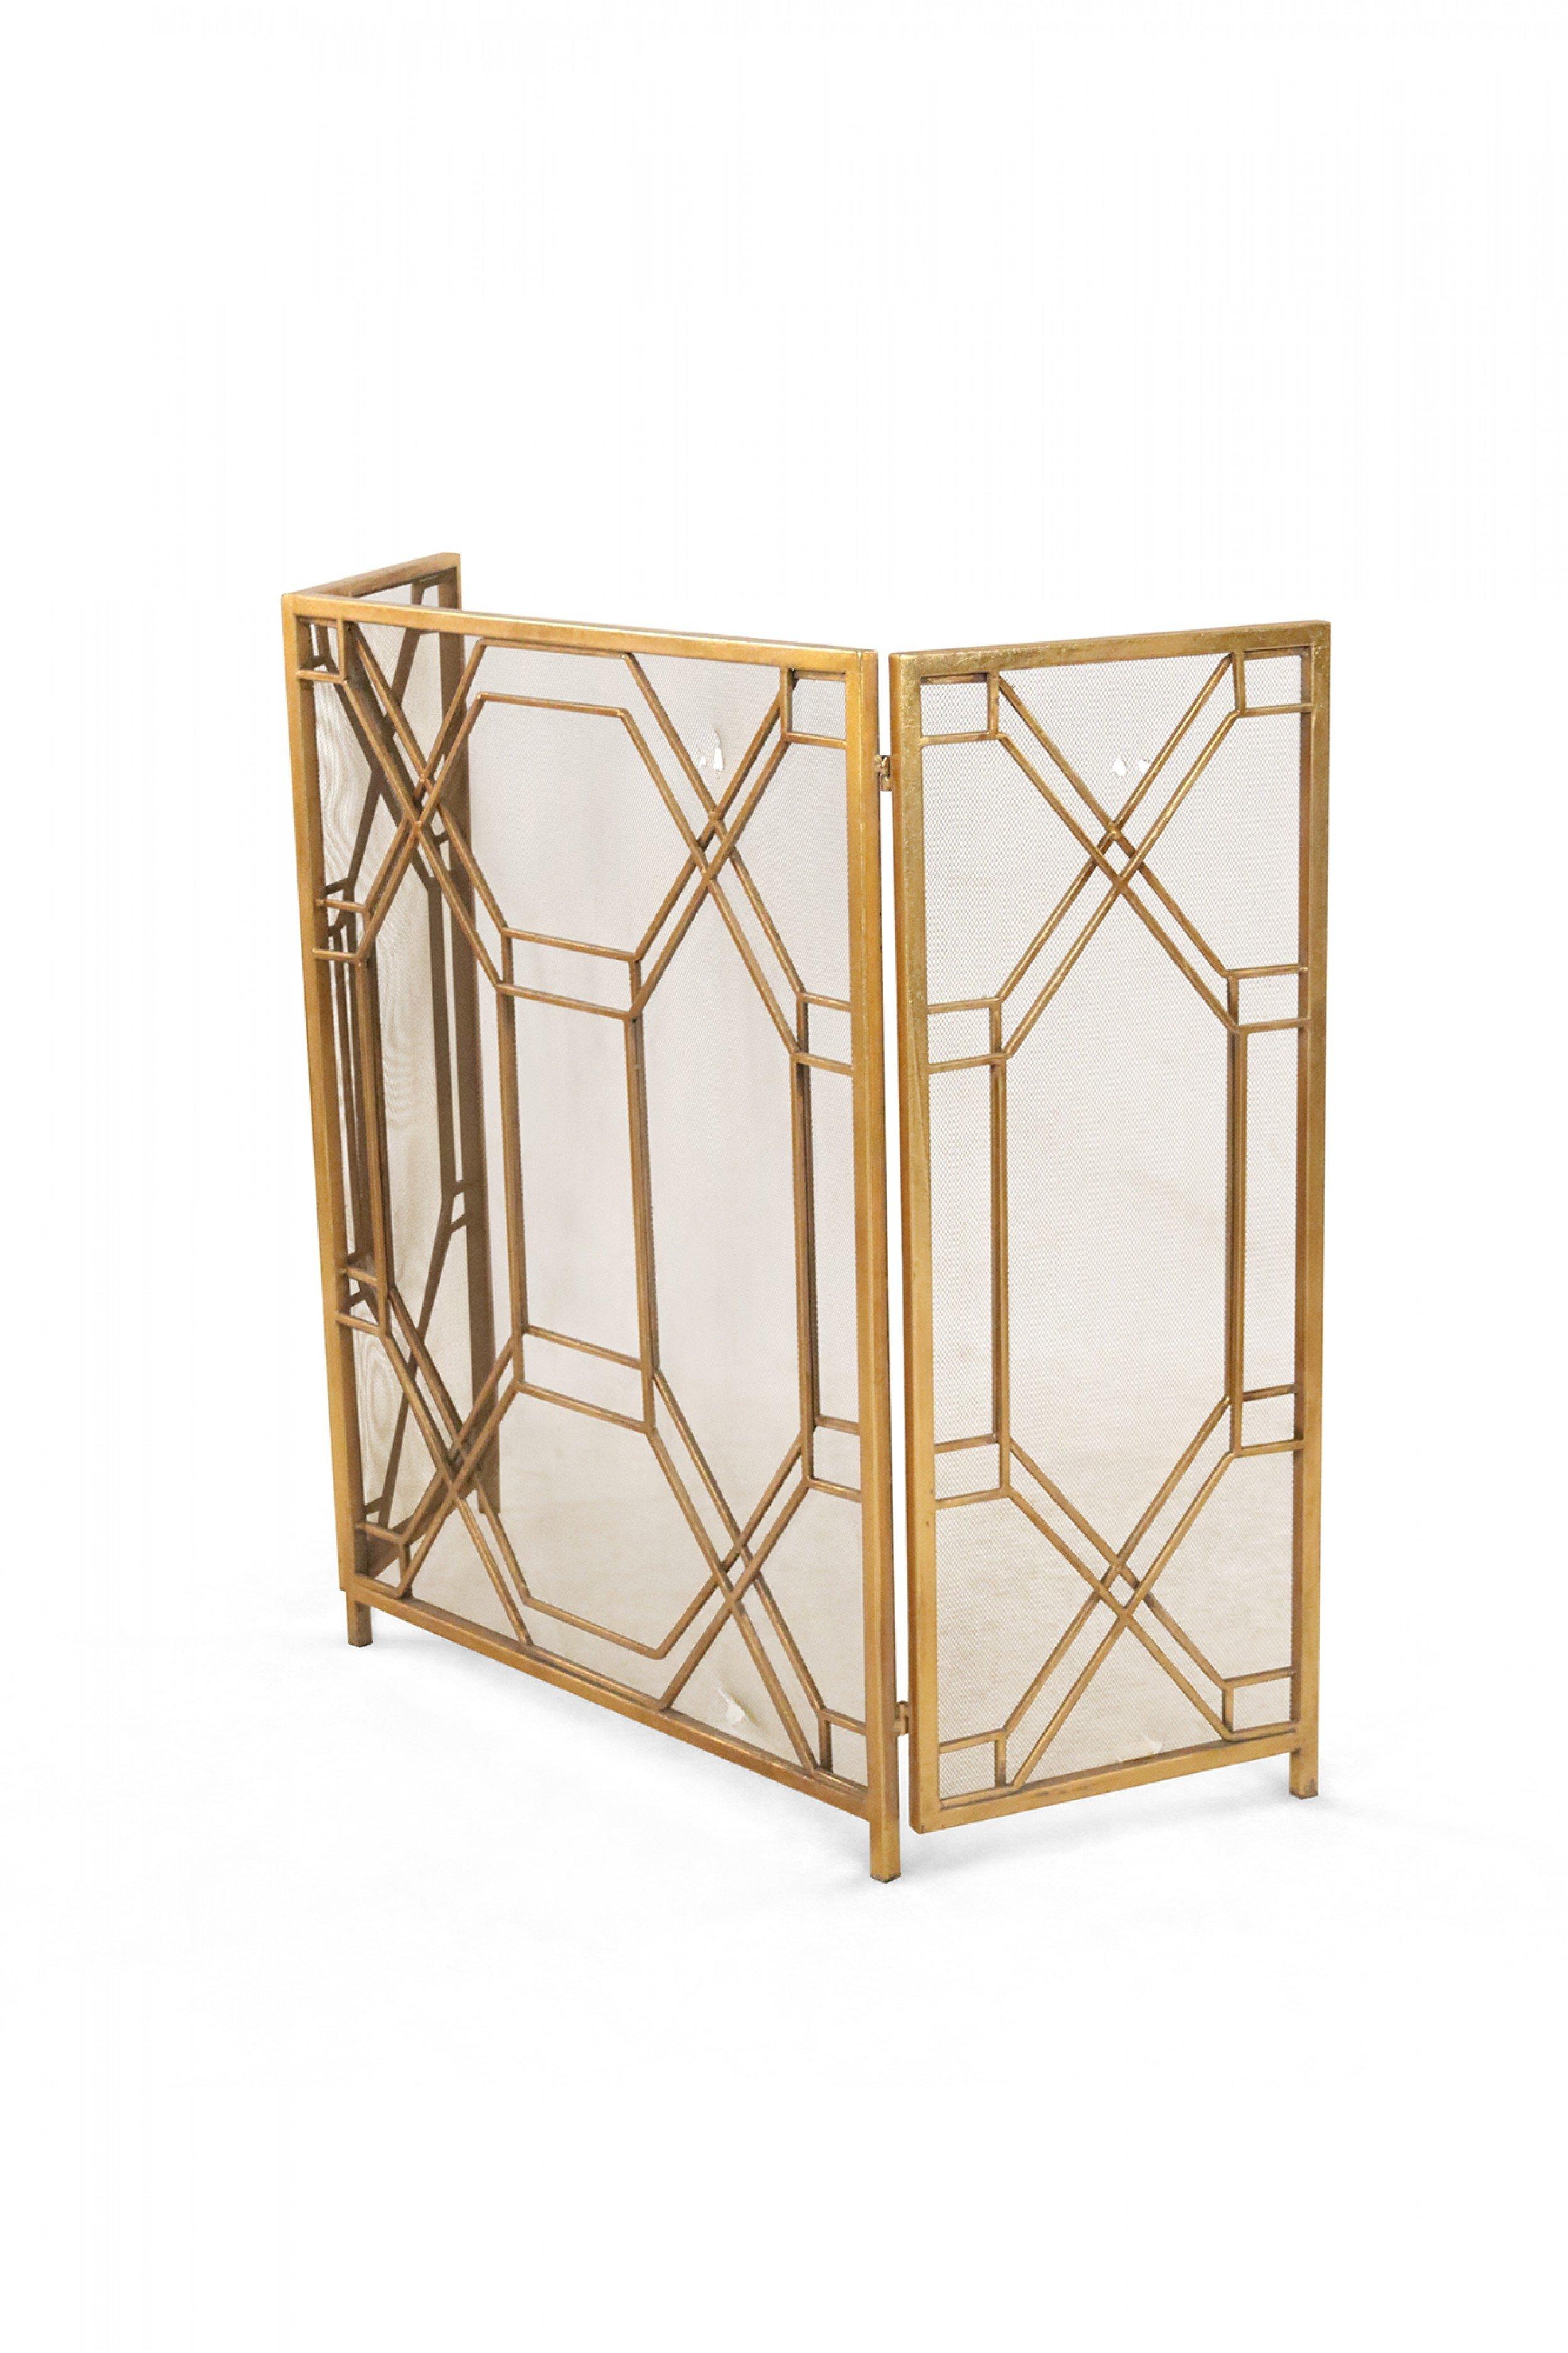 Mid-century brass framed tri-fold fire screen with screen wire panels and geometric design.
 